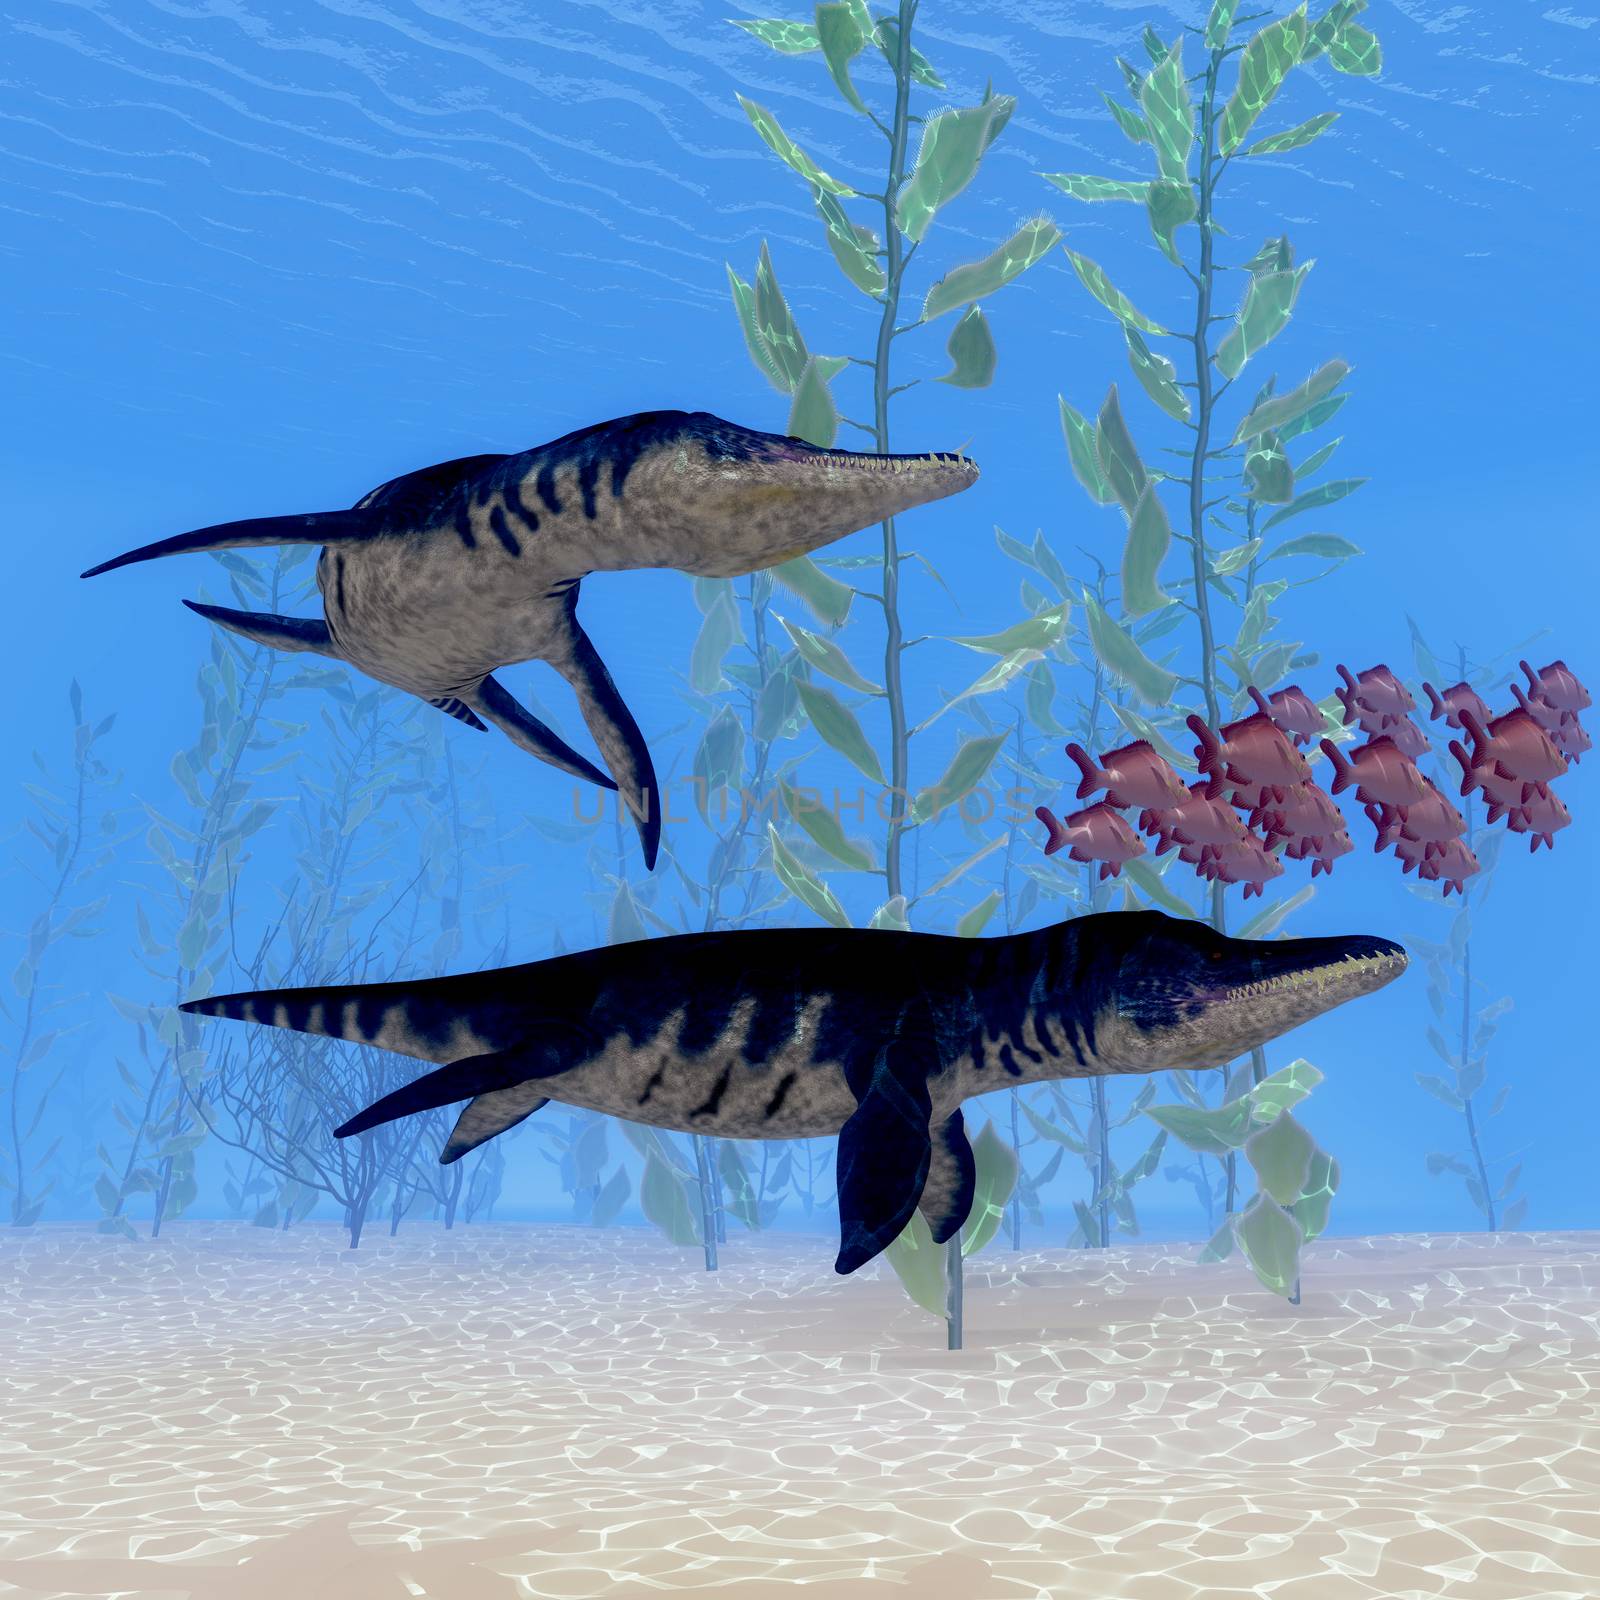 Two Liopleurodon marine reptiles chase after a school of Red Snapper fish in Jurassic Seas.